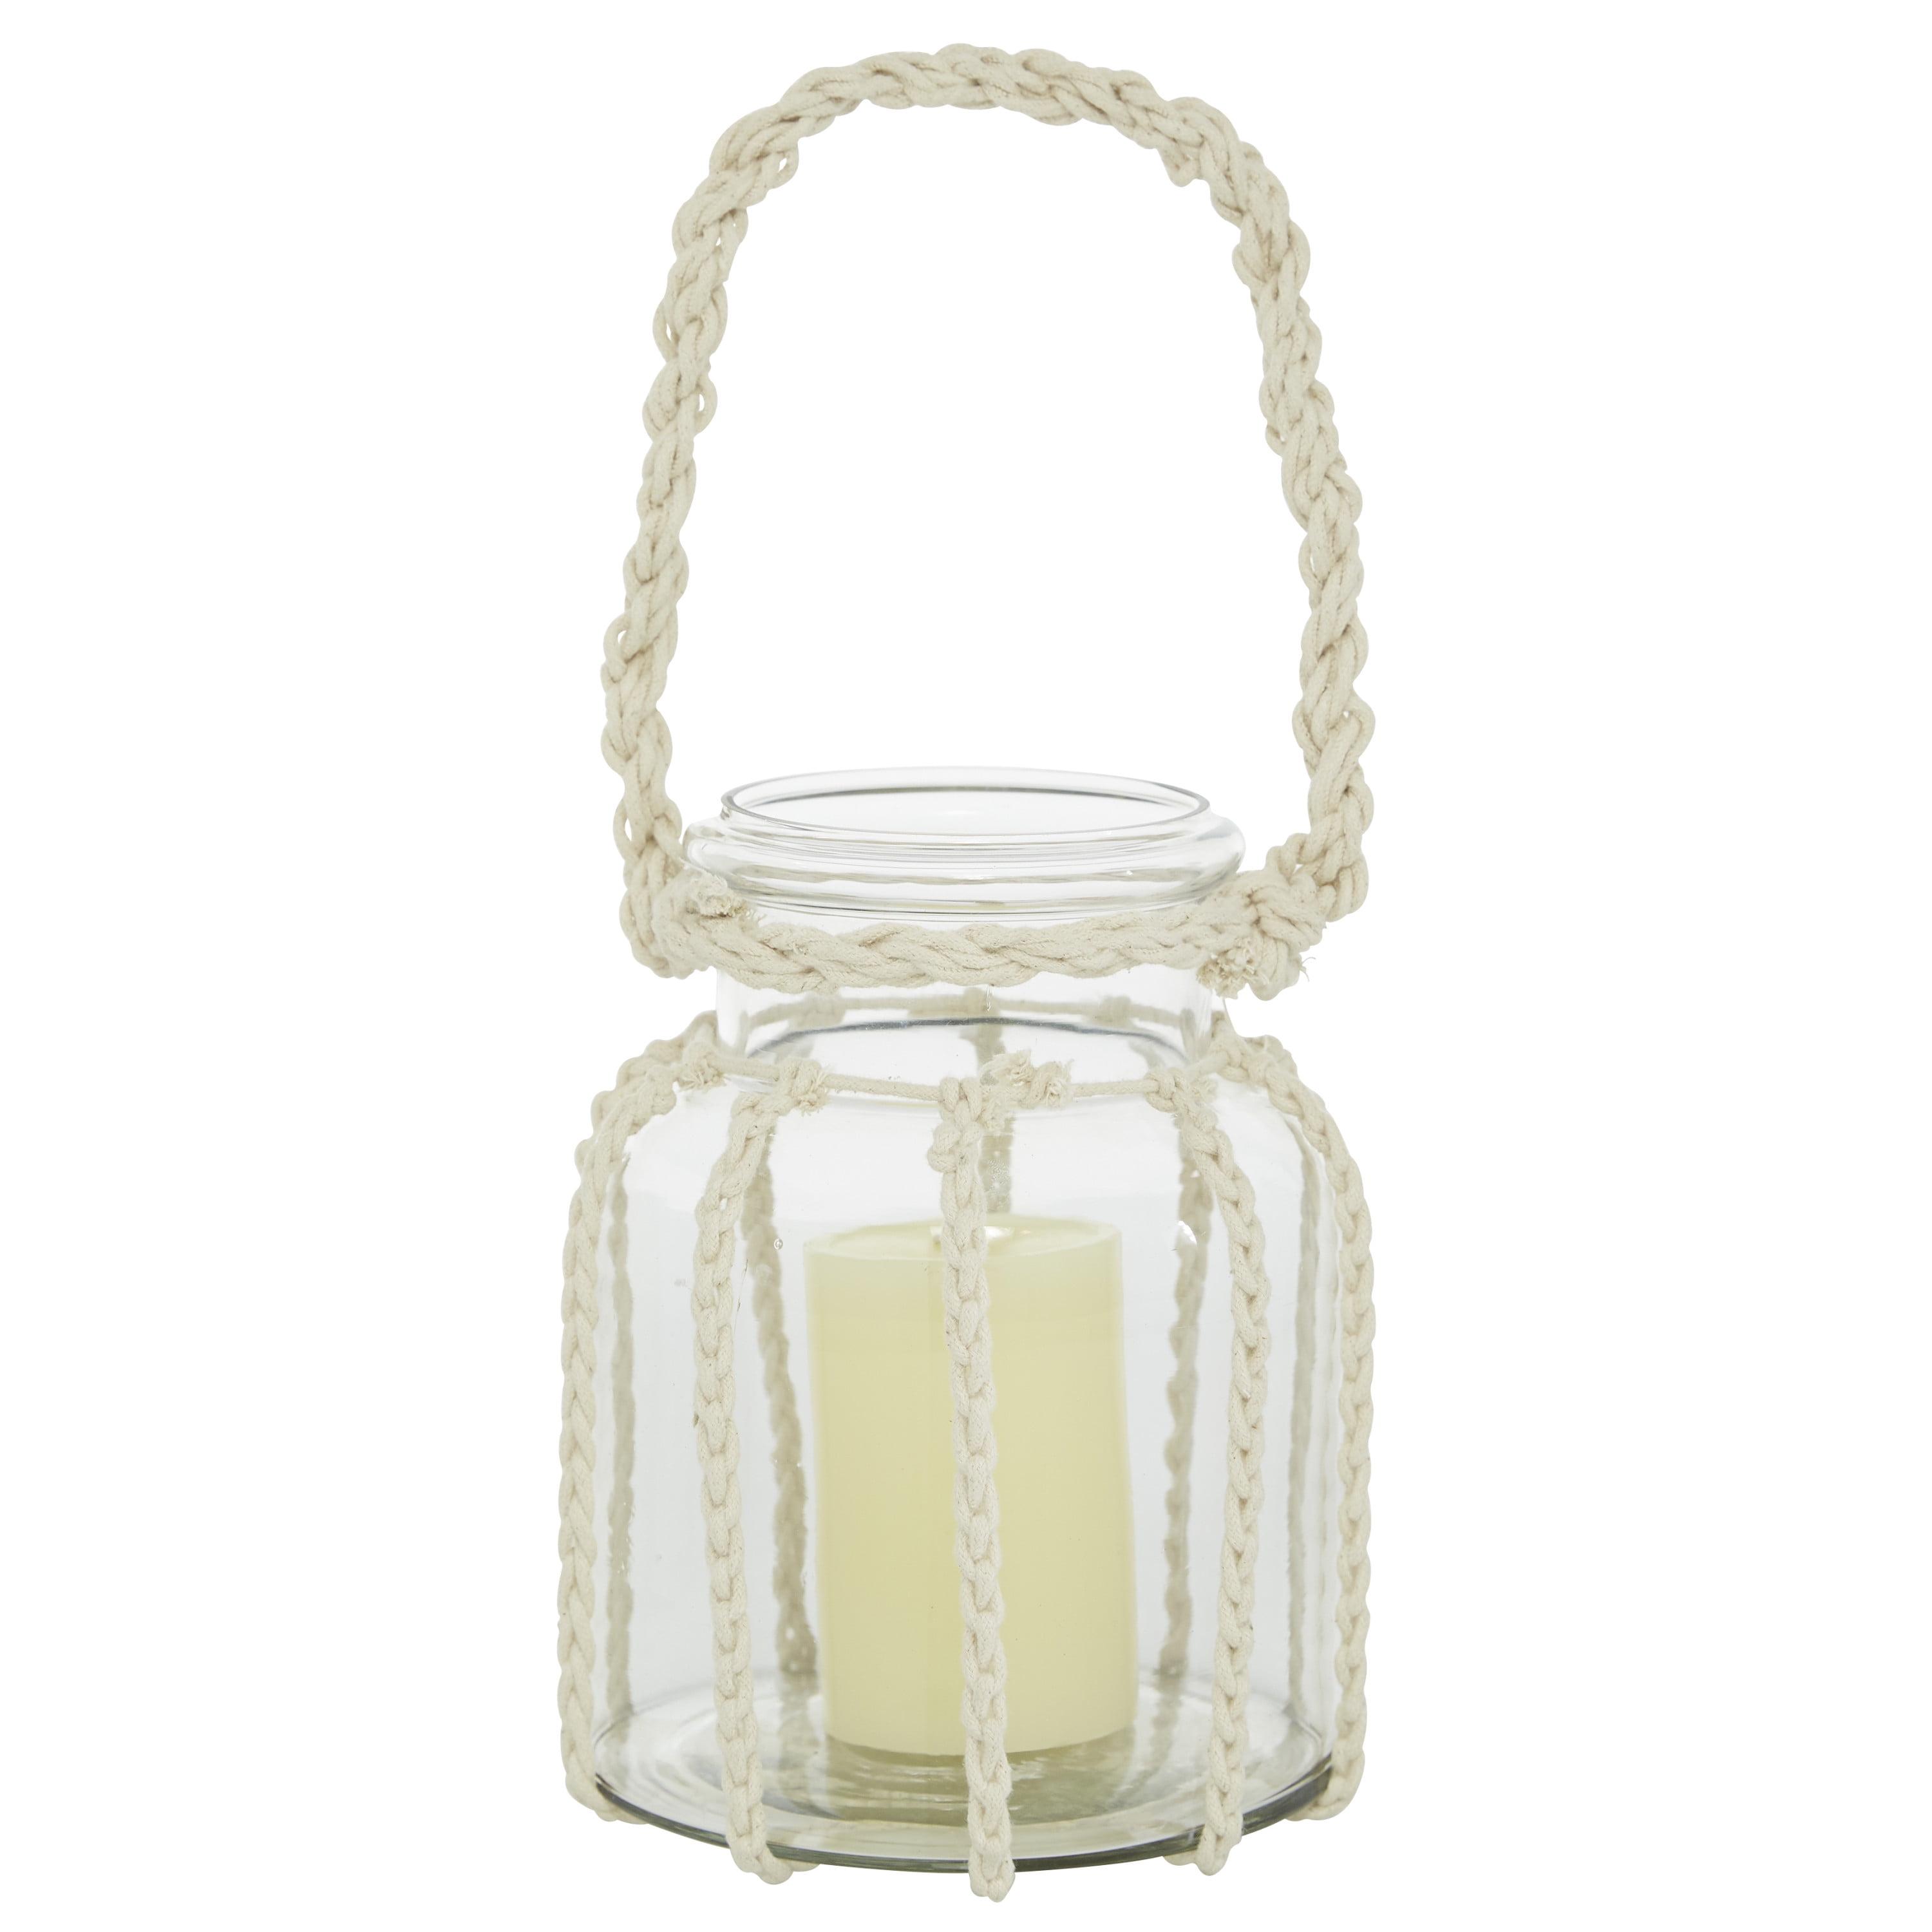 Coastal Charm Wooden Hanging Candle Lantern, 8" Clear Glass